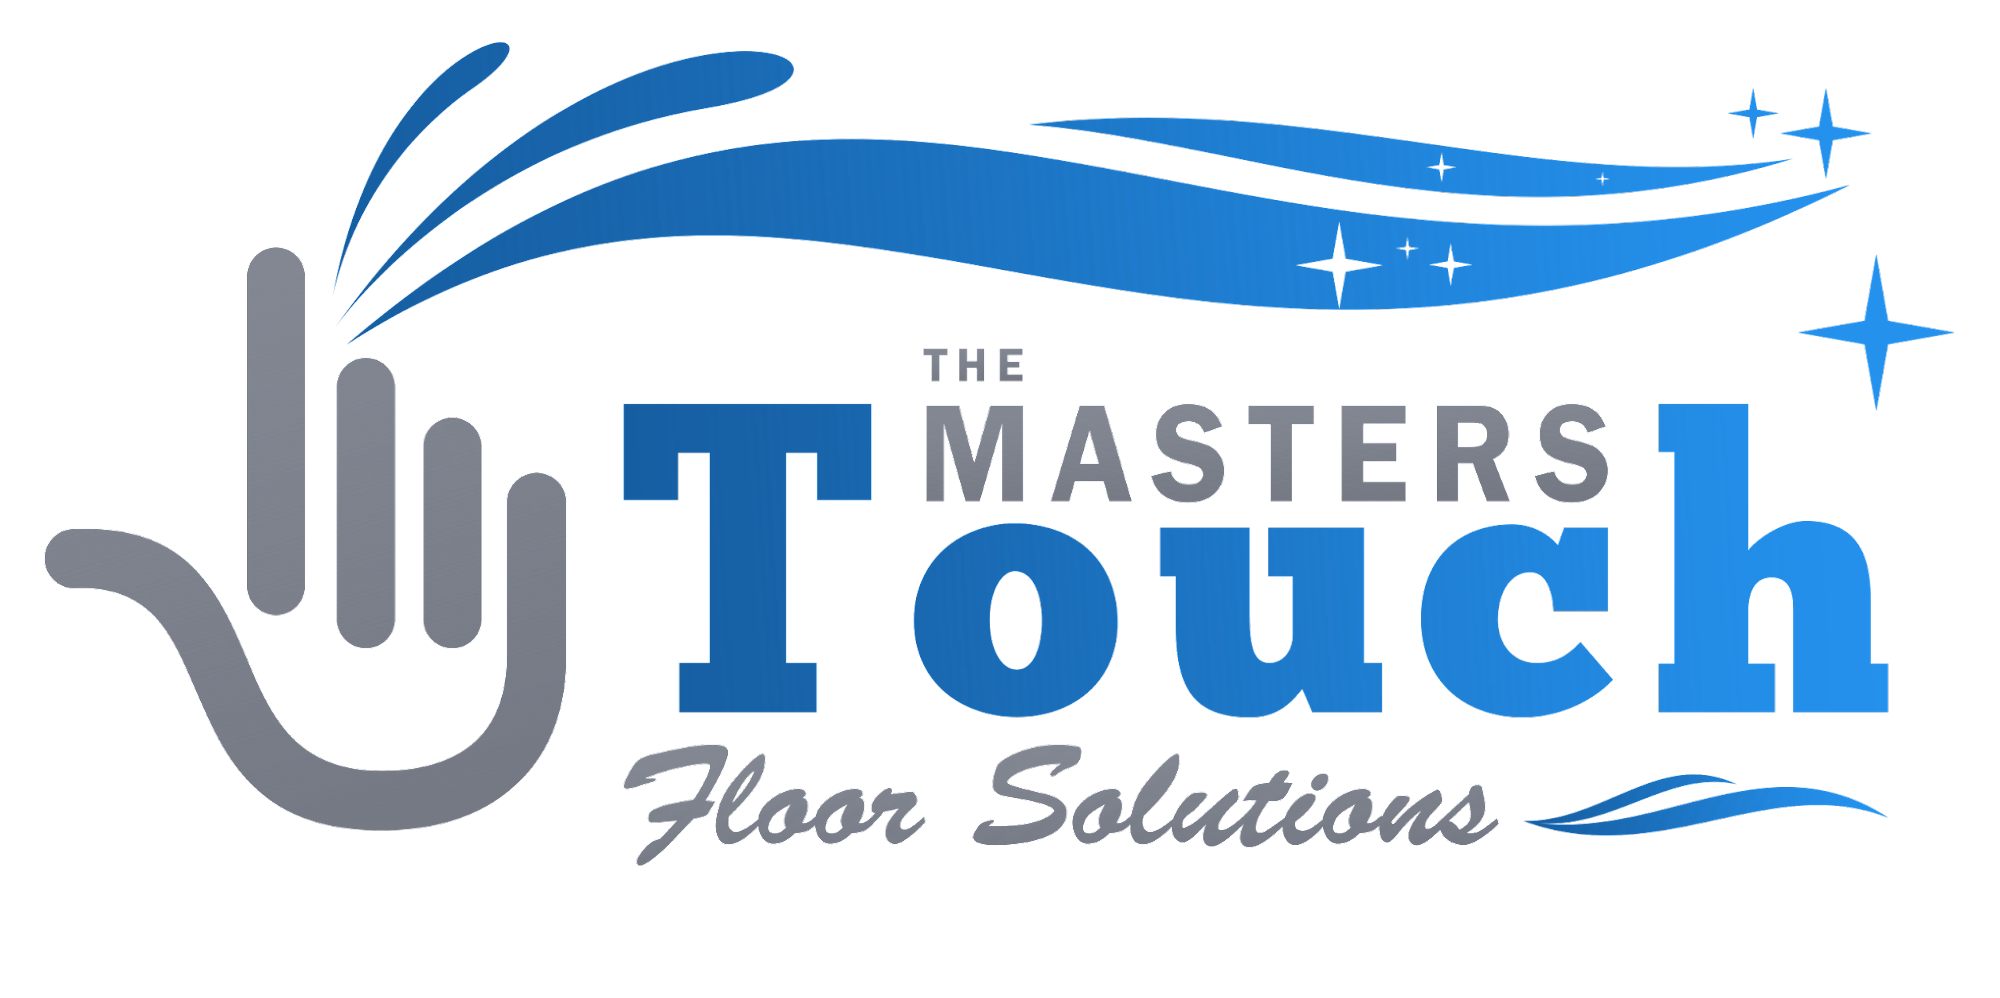 The Master's Touch Floor Solutions